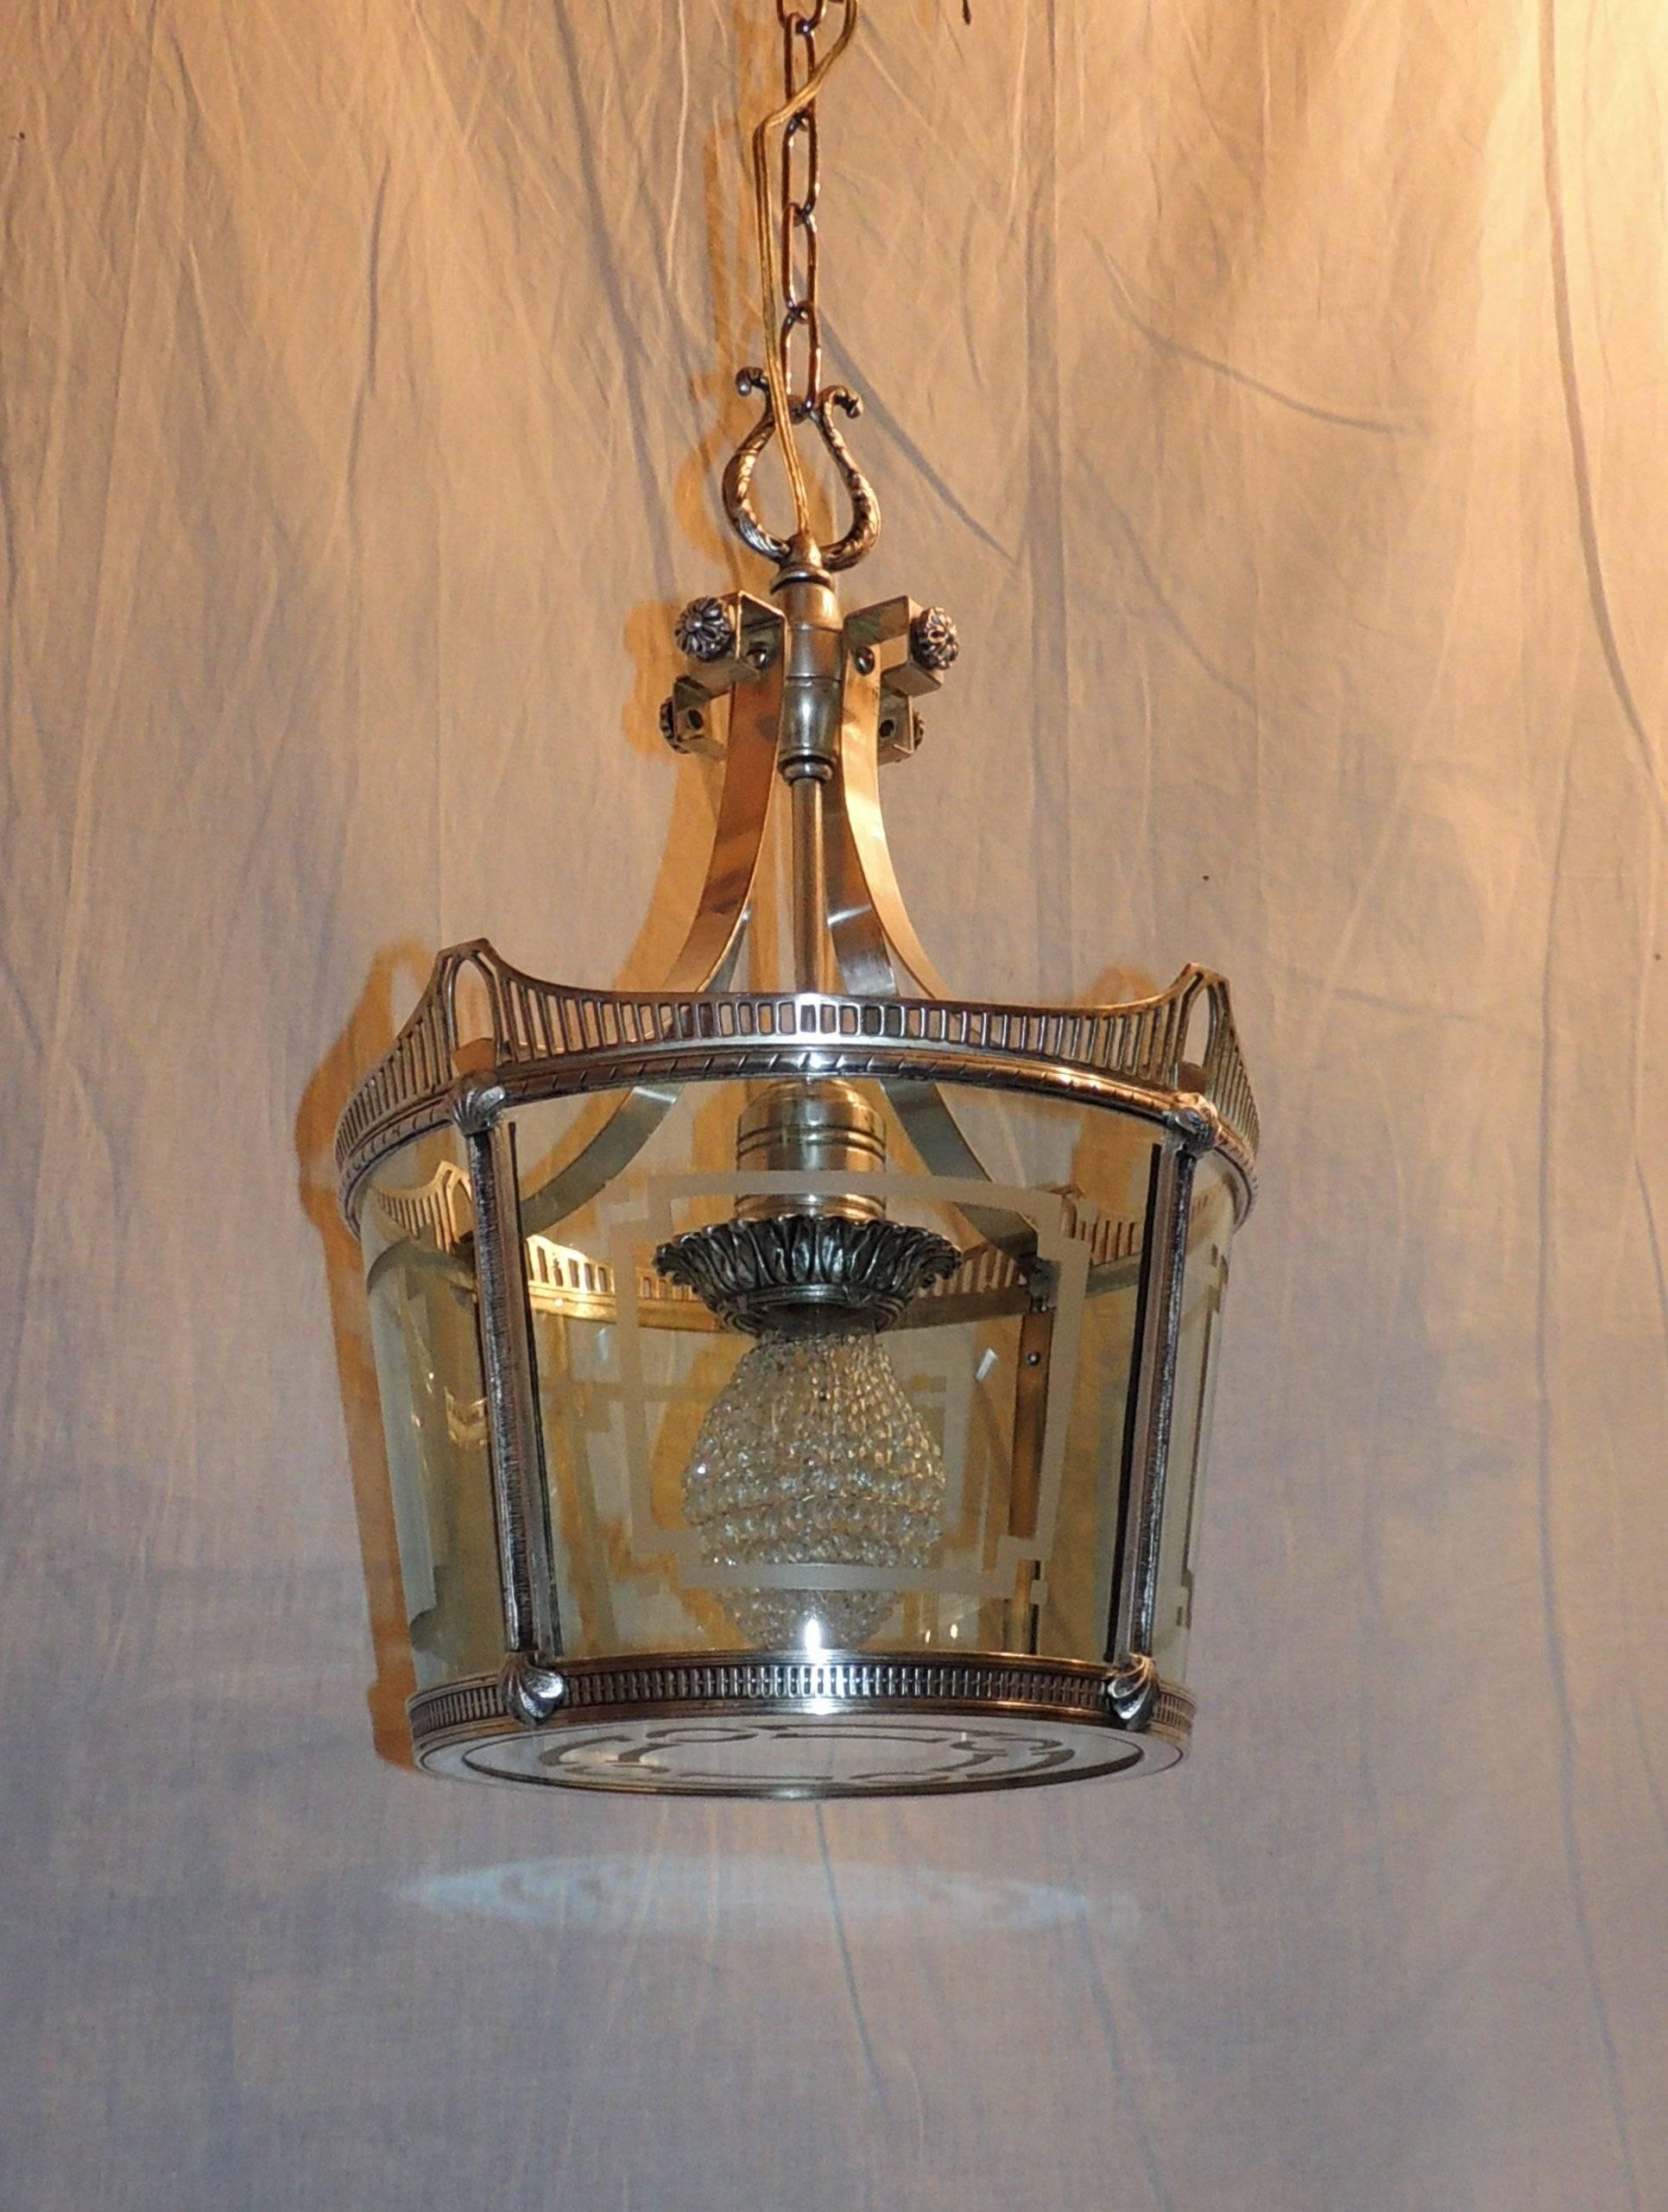 Wonderful pierced rims surround the beautiful etched glass of this charming silver lantern, with filigree detail on top and canopy.

Measures: 19